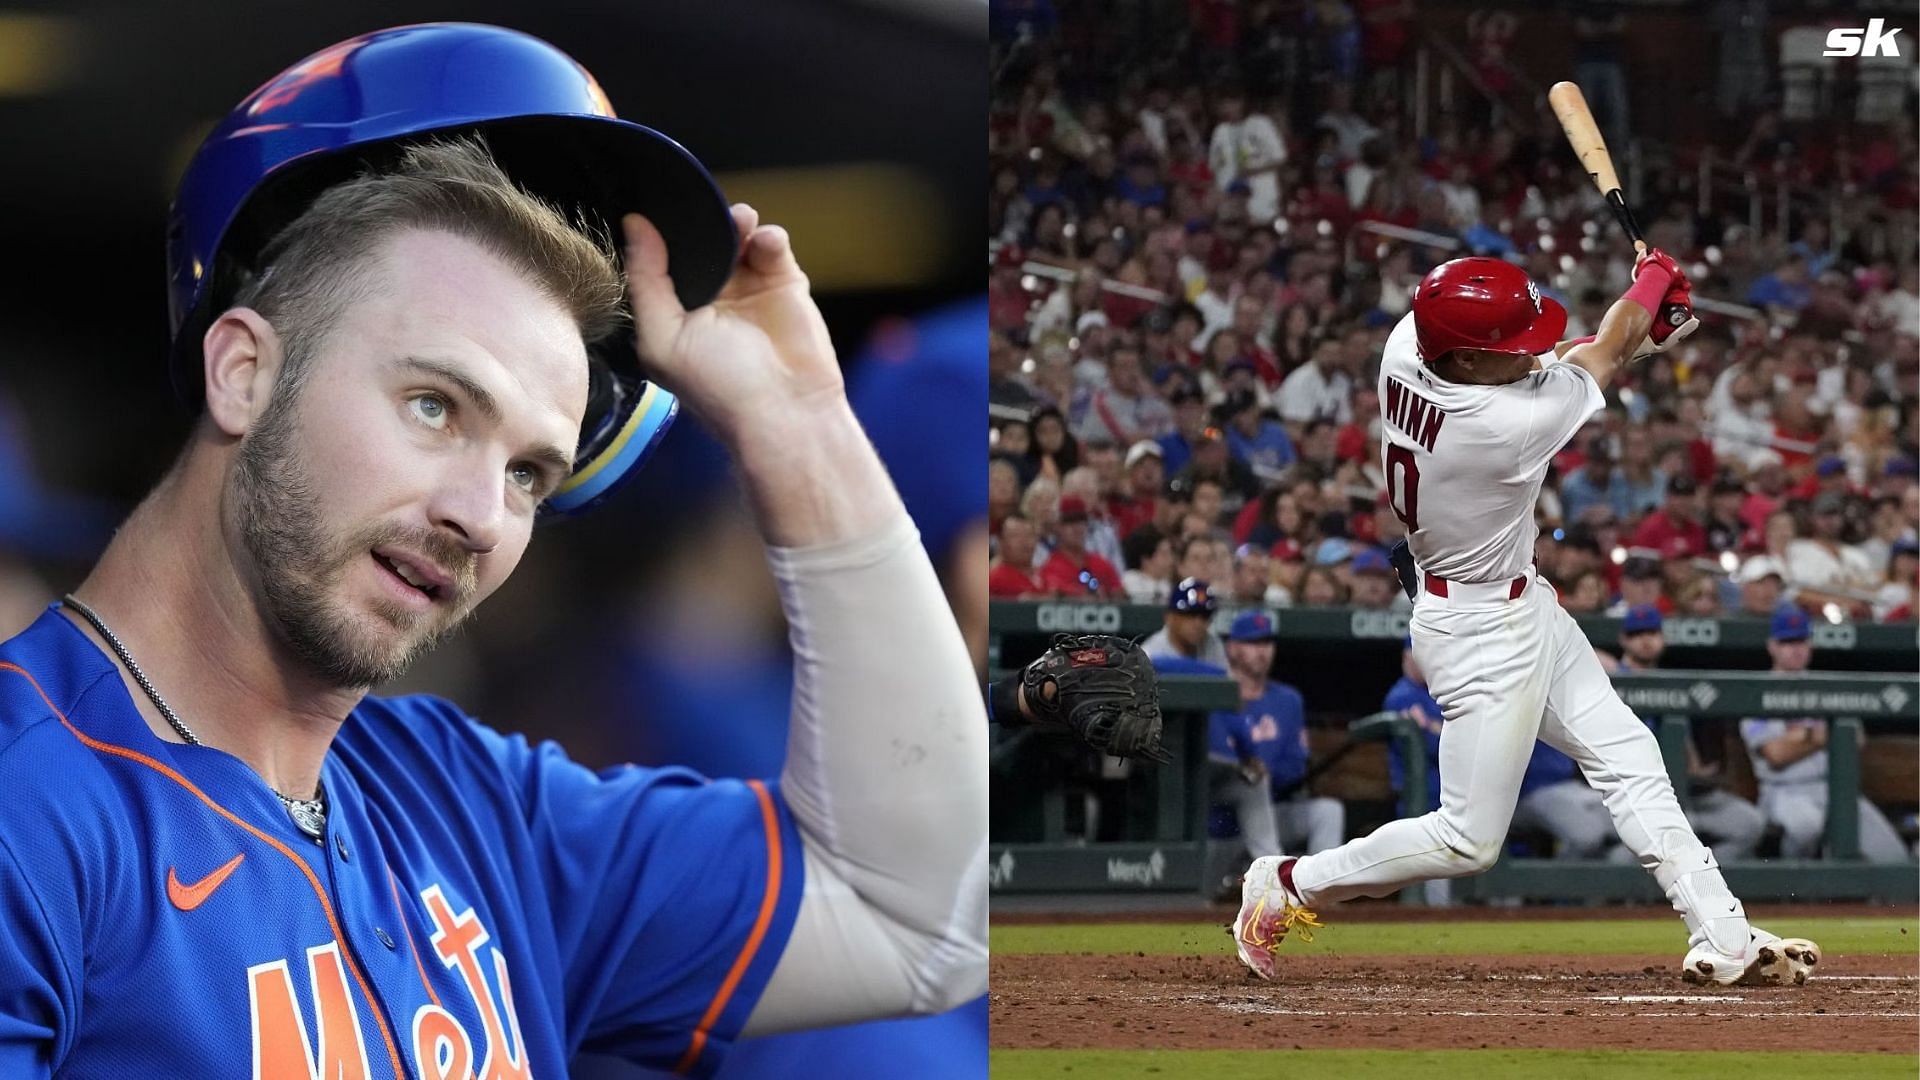 Cardinals rookie gets back 1st-hit ball after Mets' Alonso throws